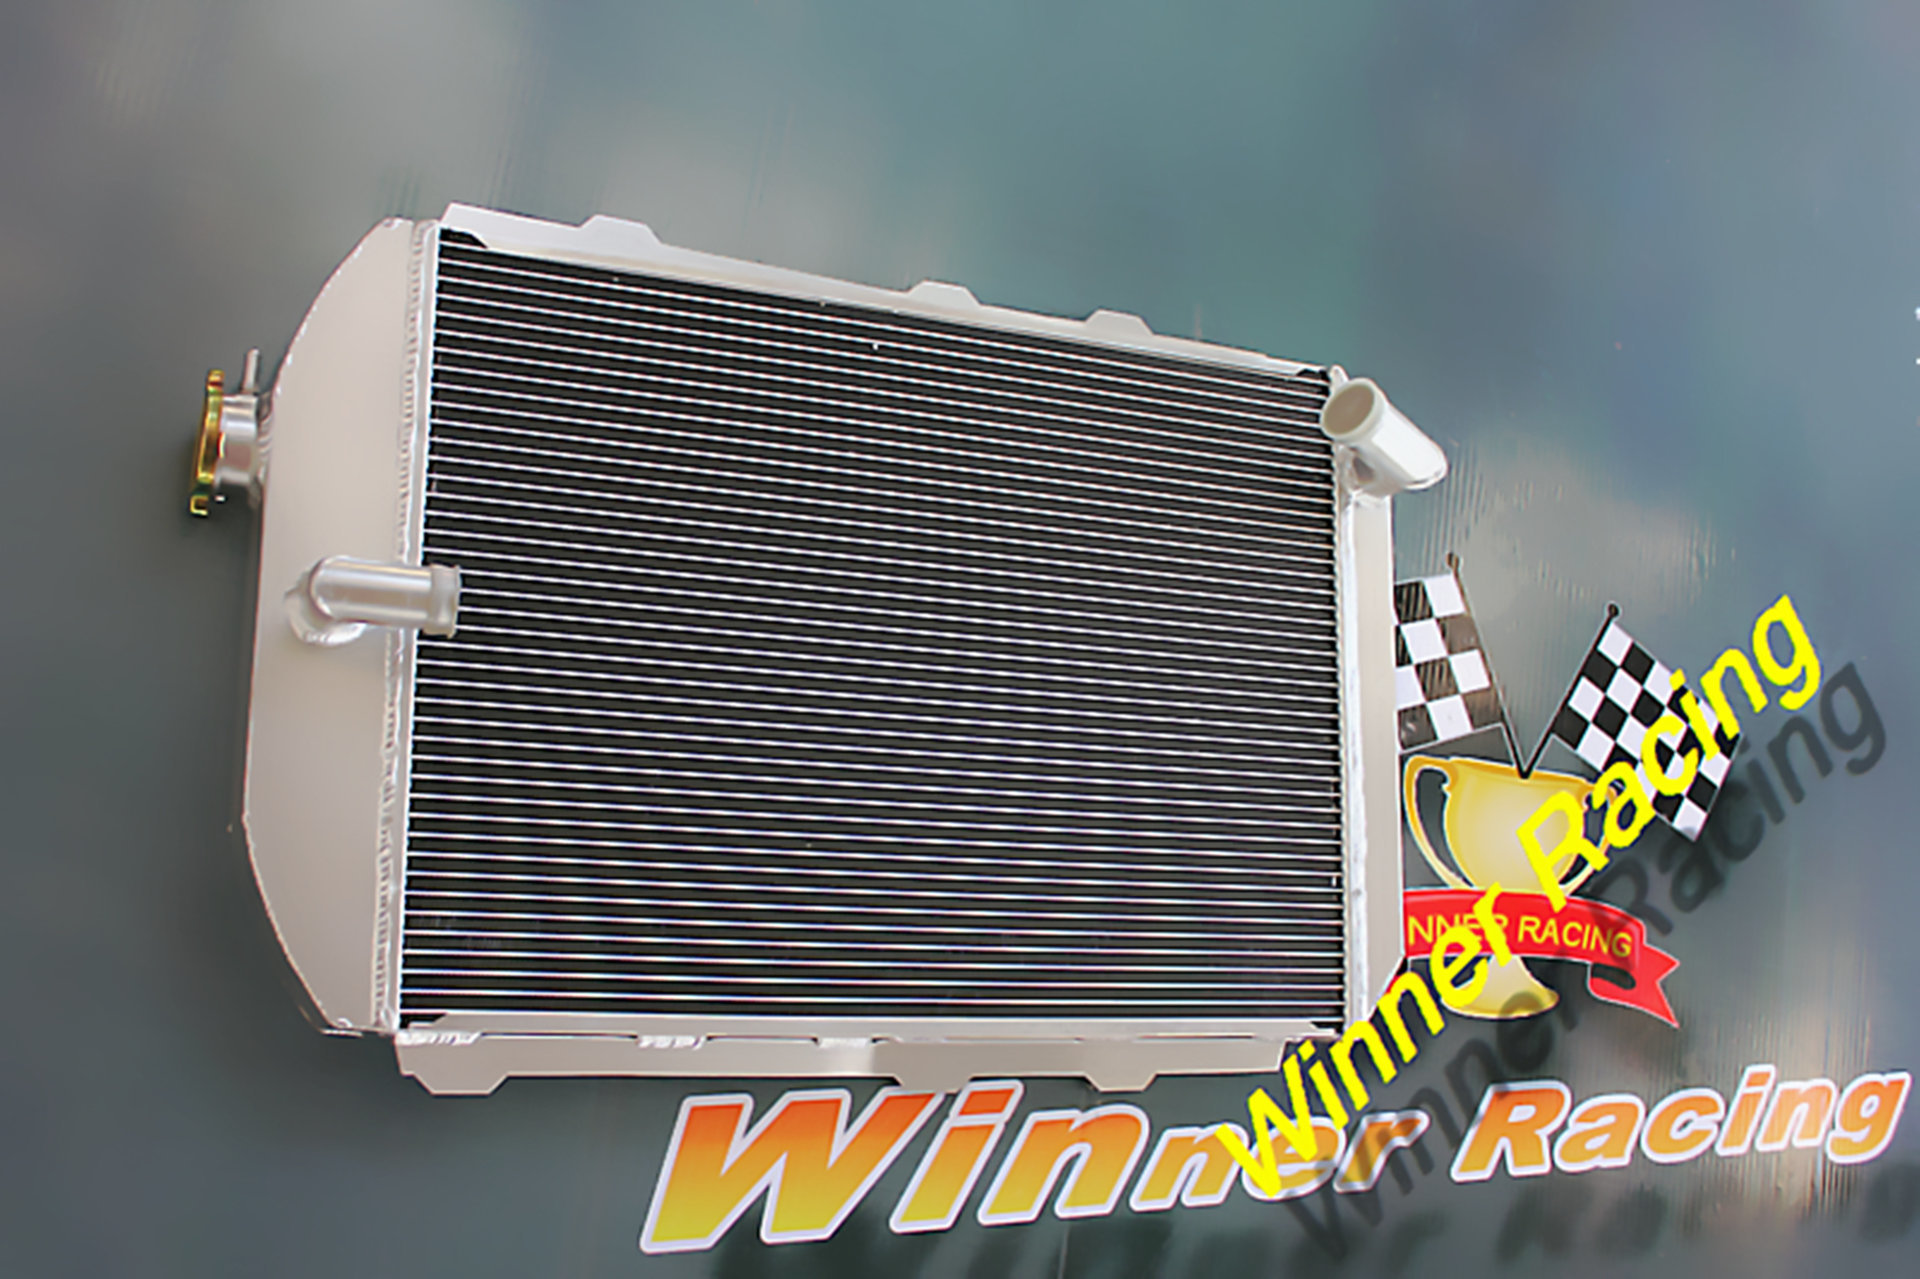   56MM ALUMINUM RADIATOR FOR CHEVY HOT/STREET ROD 6 Cylinder /CYL.   700HP 1938